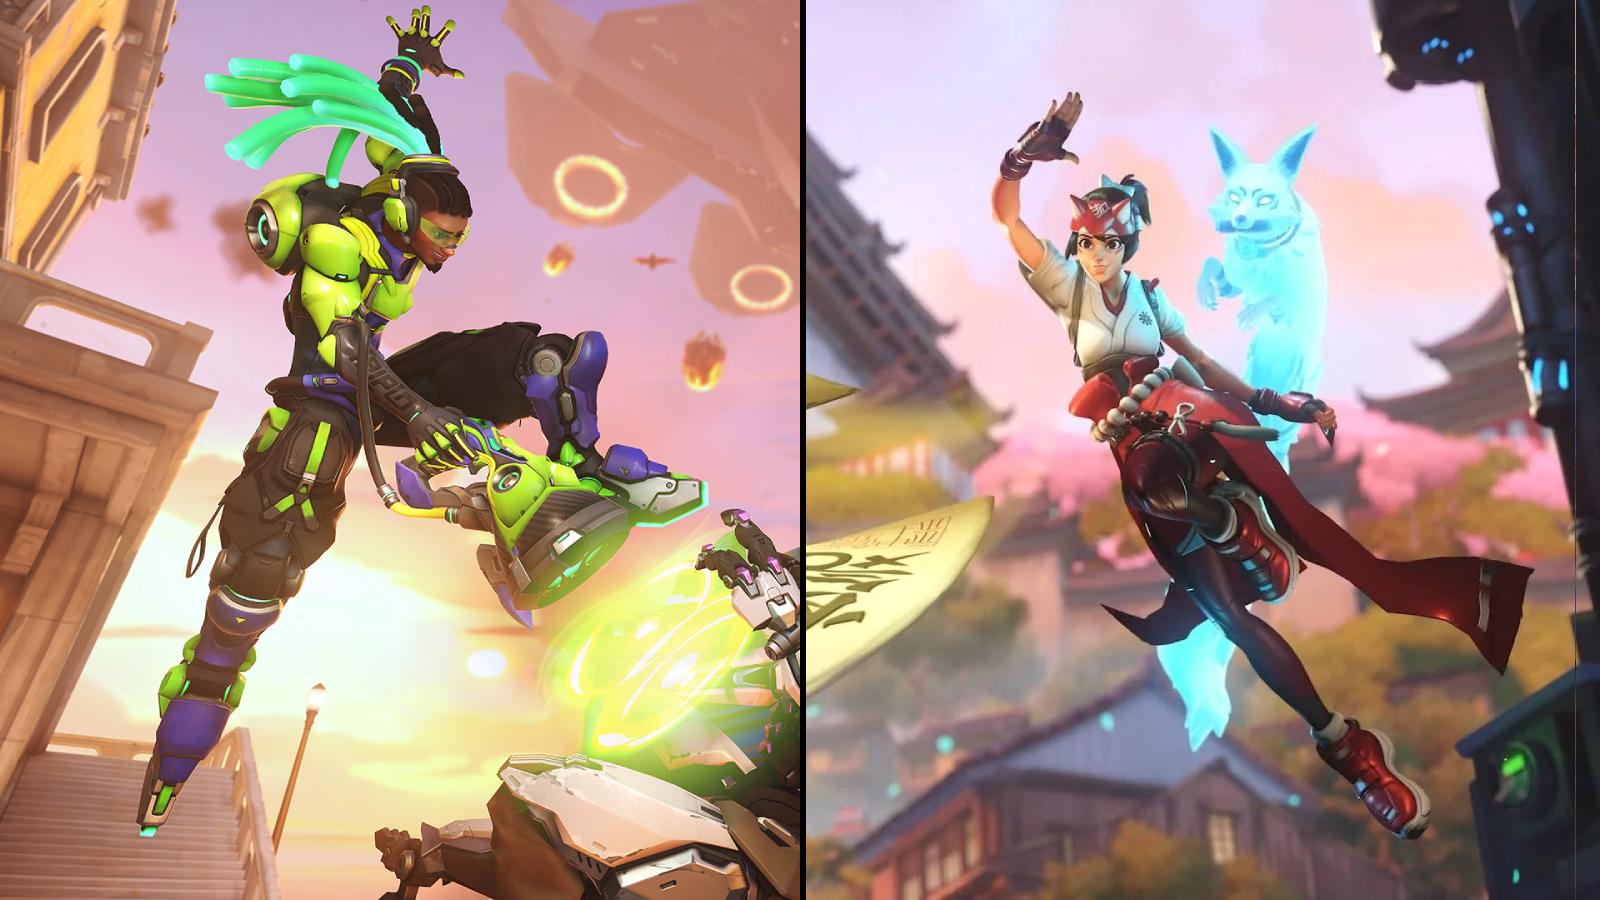 Lucio and Kiriko from Overwatch 2 side by side